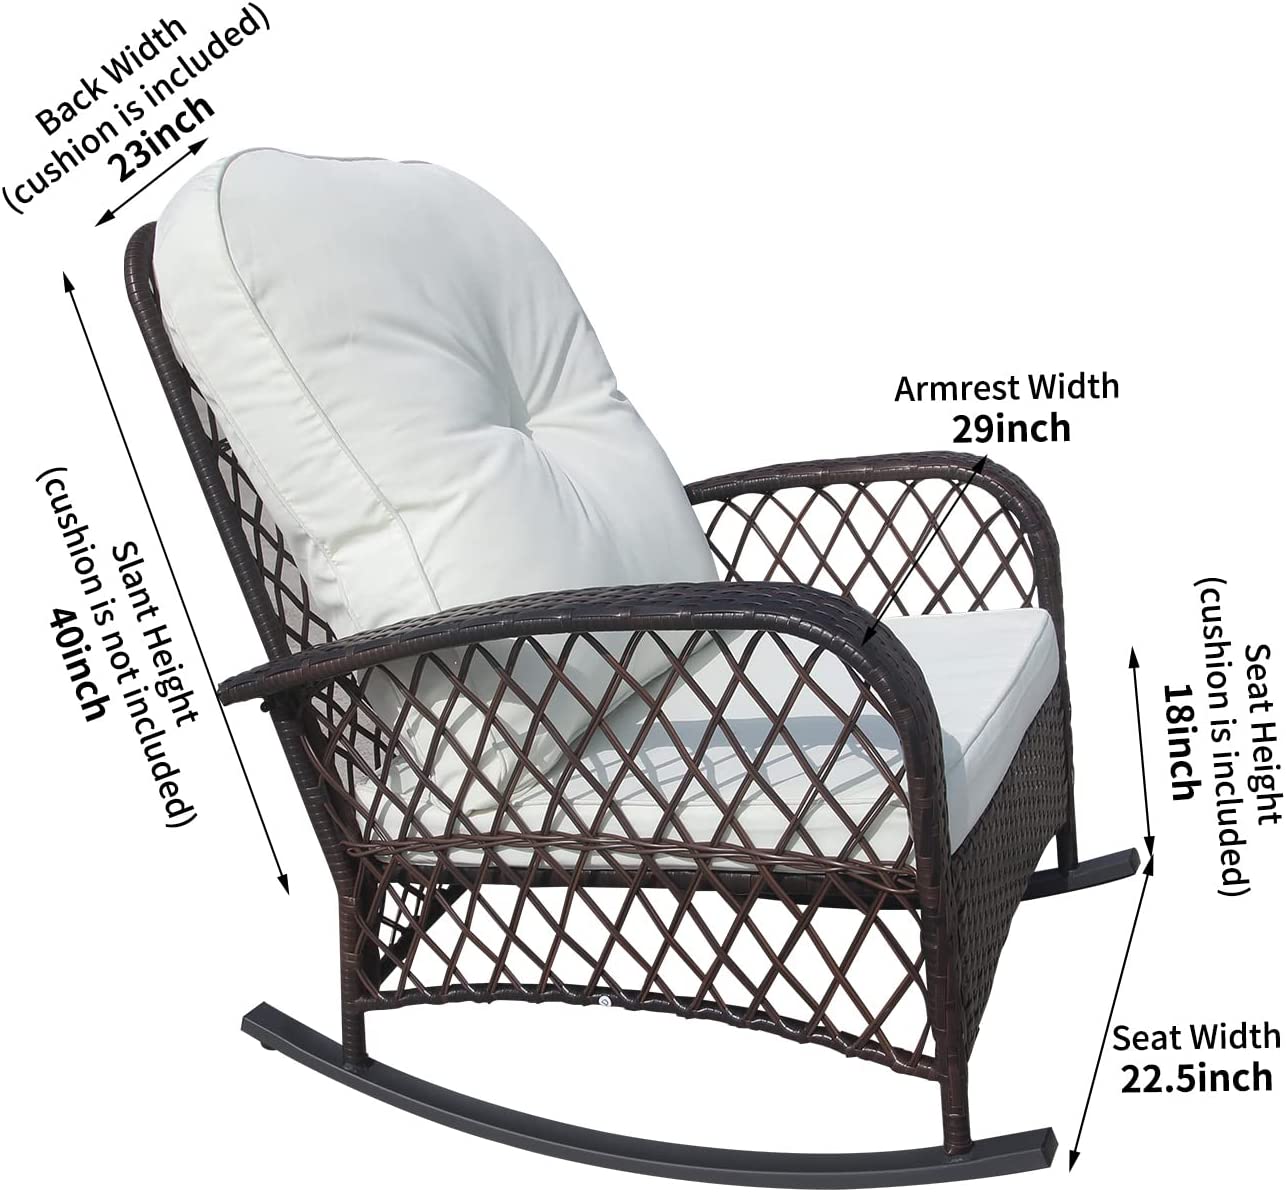 Furniture One Outdoor Wicker Rocking Chair, Patio Rattan Rocker Chair with Cushions & Steel Frame, All-Weather Rocking Lawn Wicker Furniture for Garden Backyard Porch - image 5 of 5